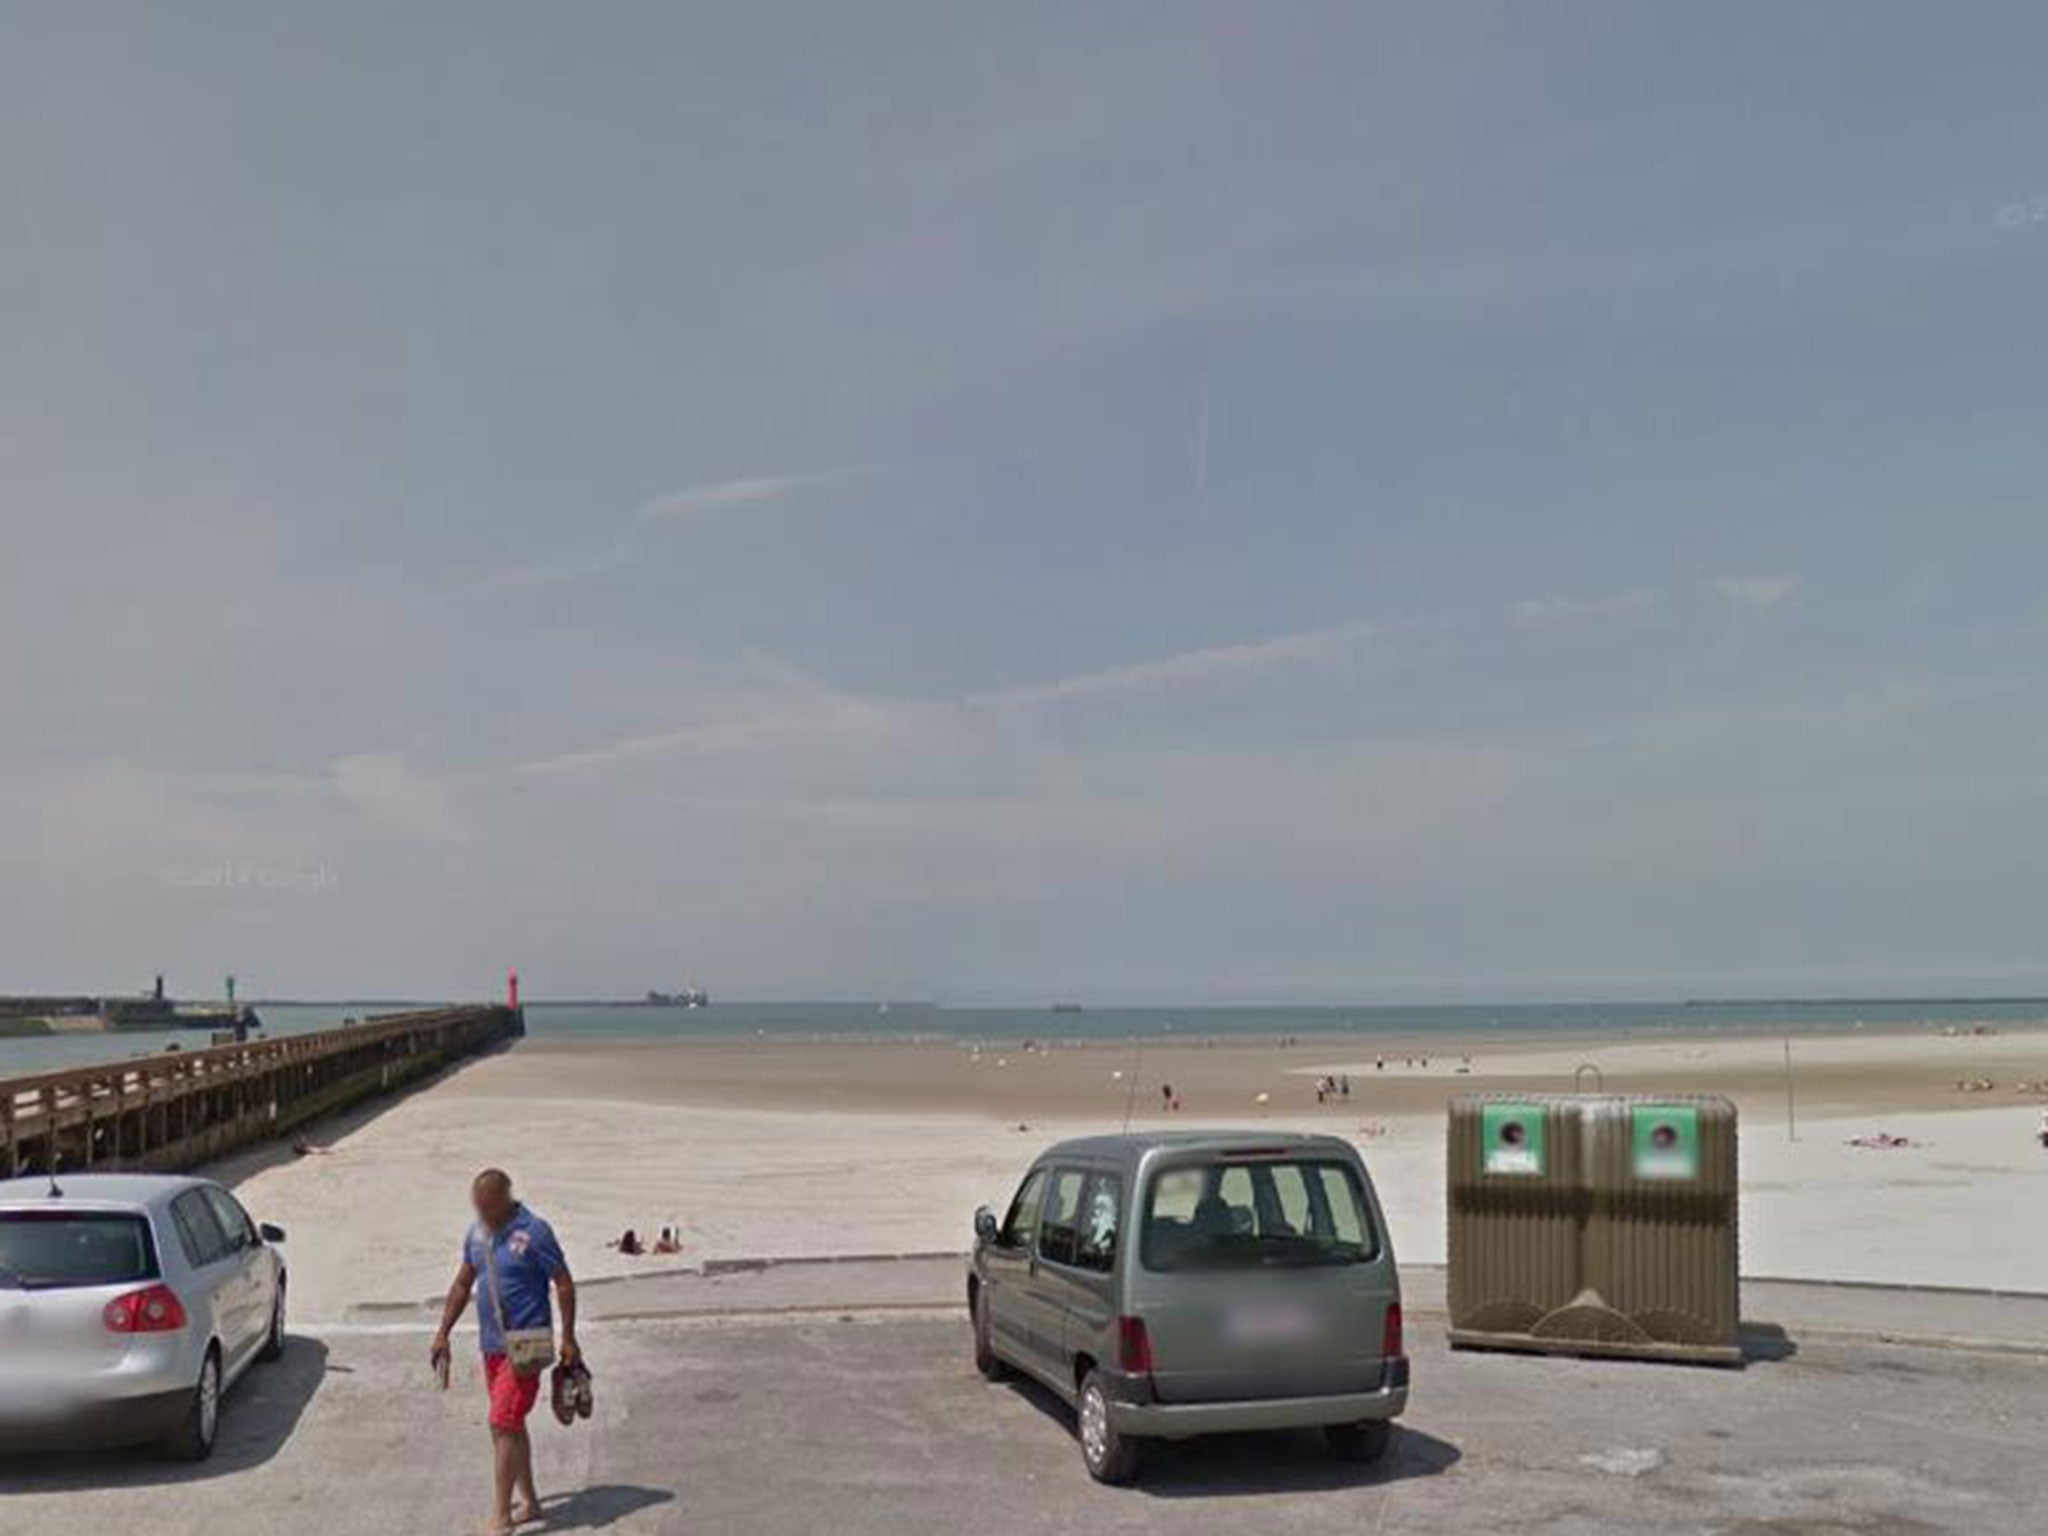 The boys had reportedly been swimming off a jetty at the entrance to Boulogne's harbour